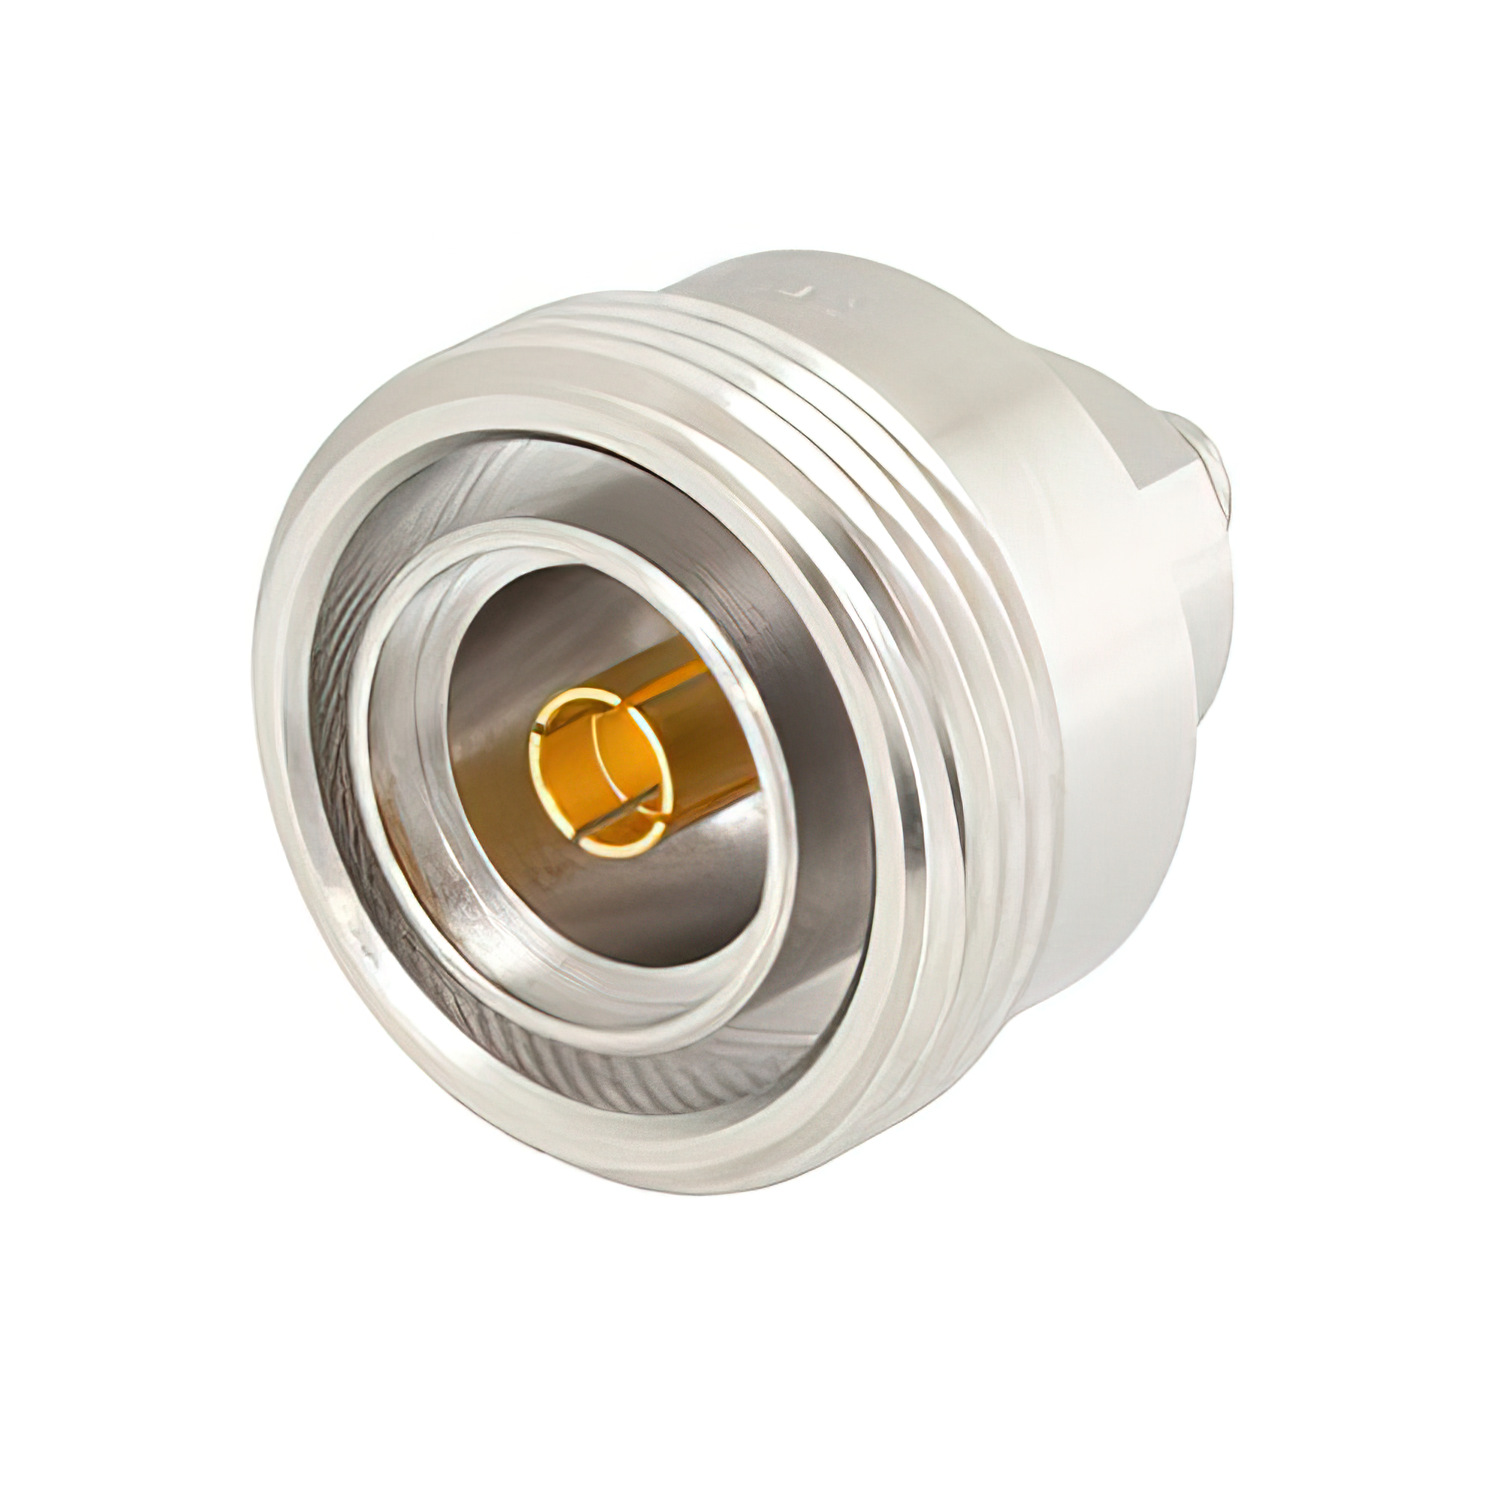 Low PIM SMA Female to 7-16 DIN Female Adapter 2